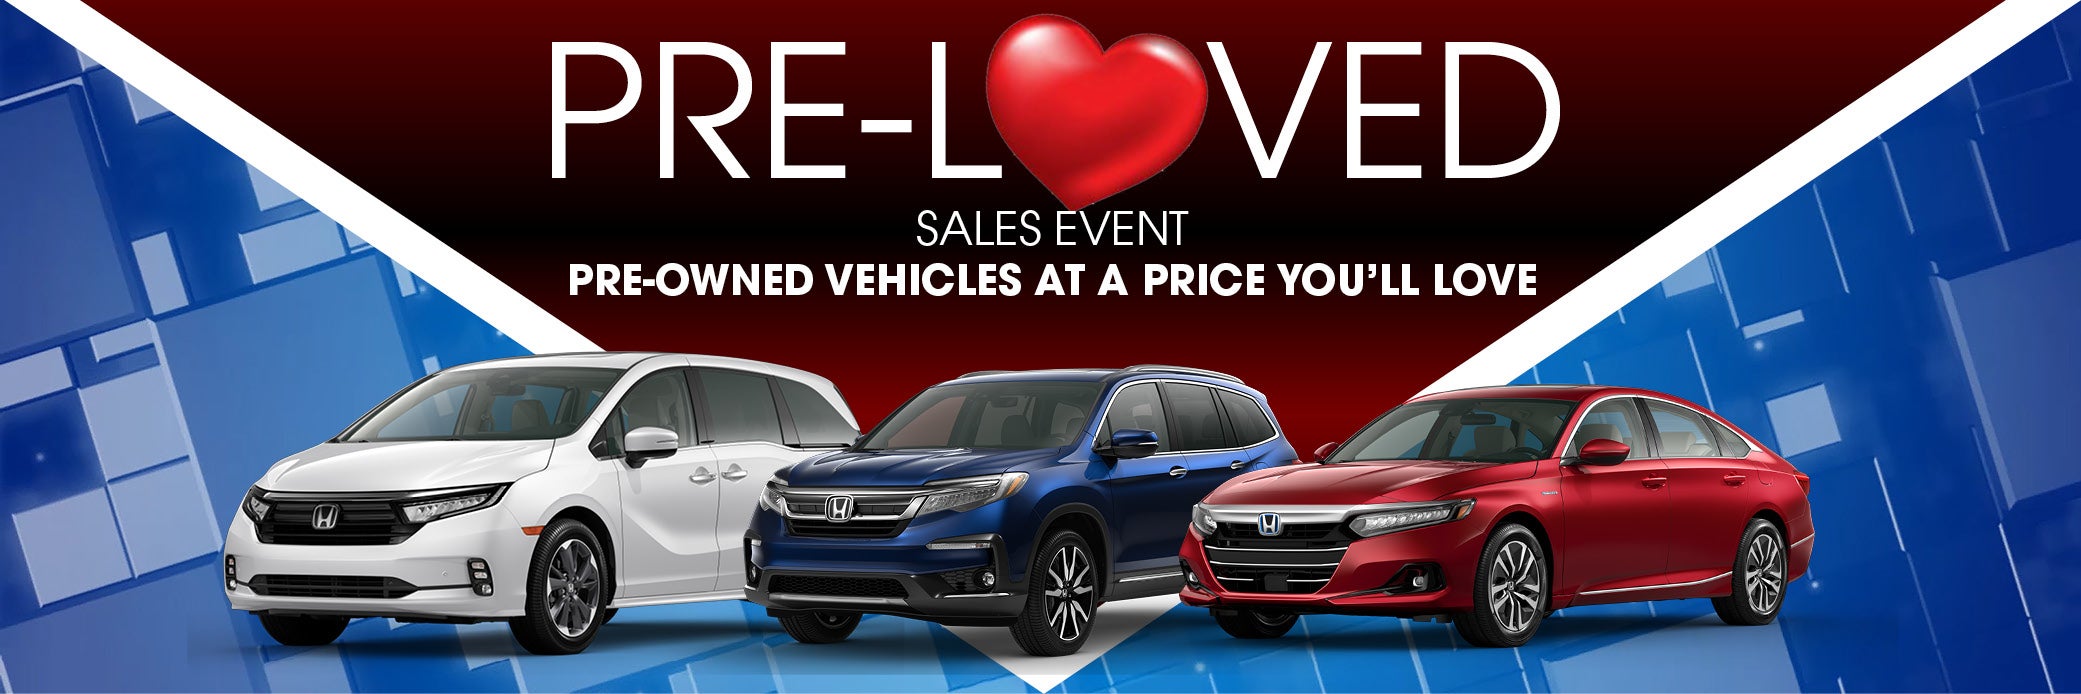 Pre-Loved Sales Event